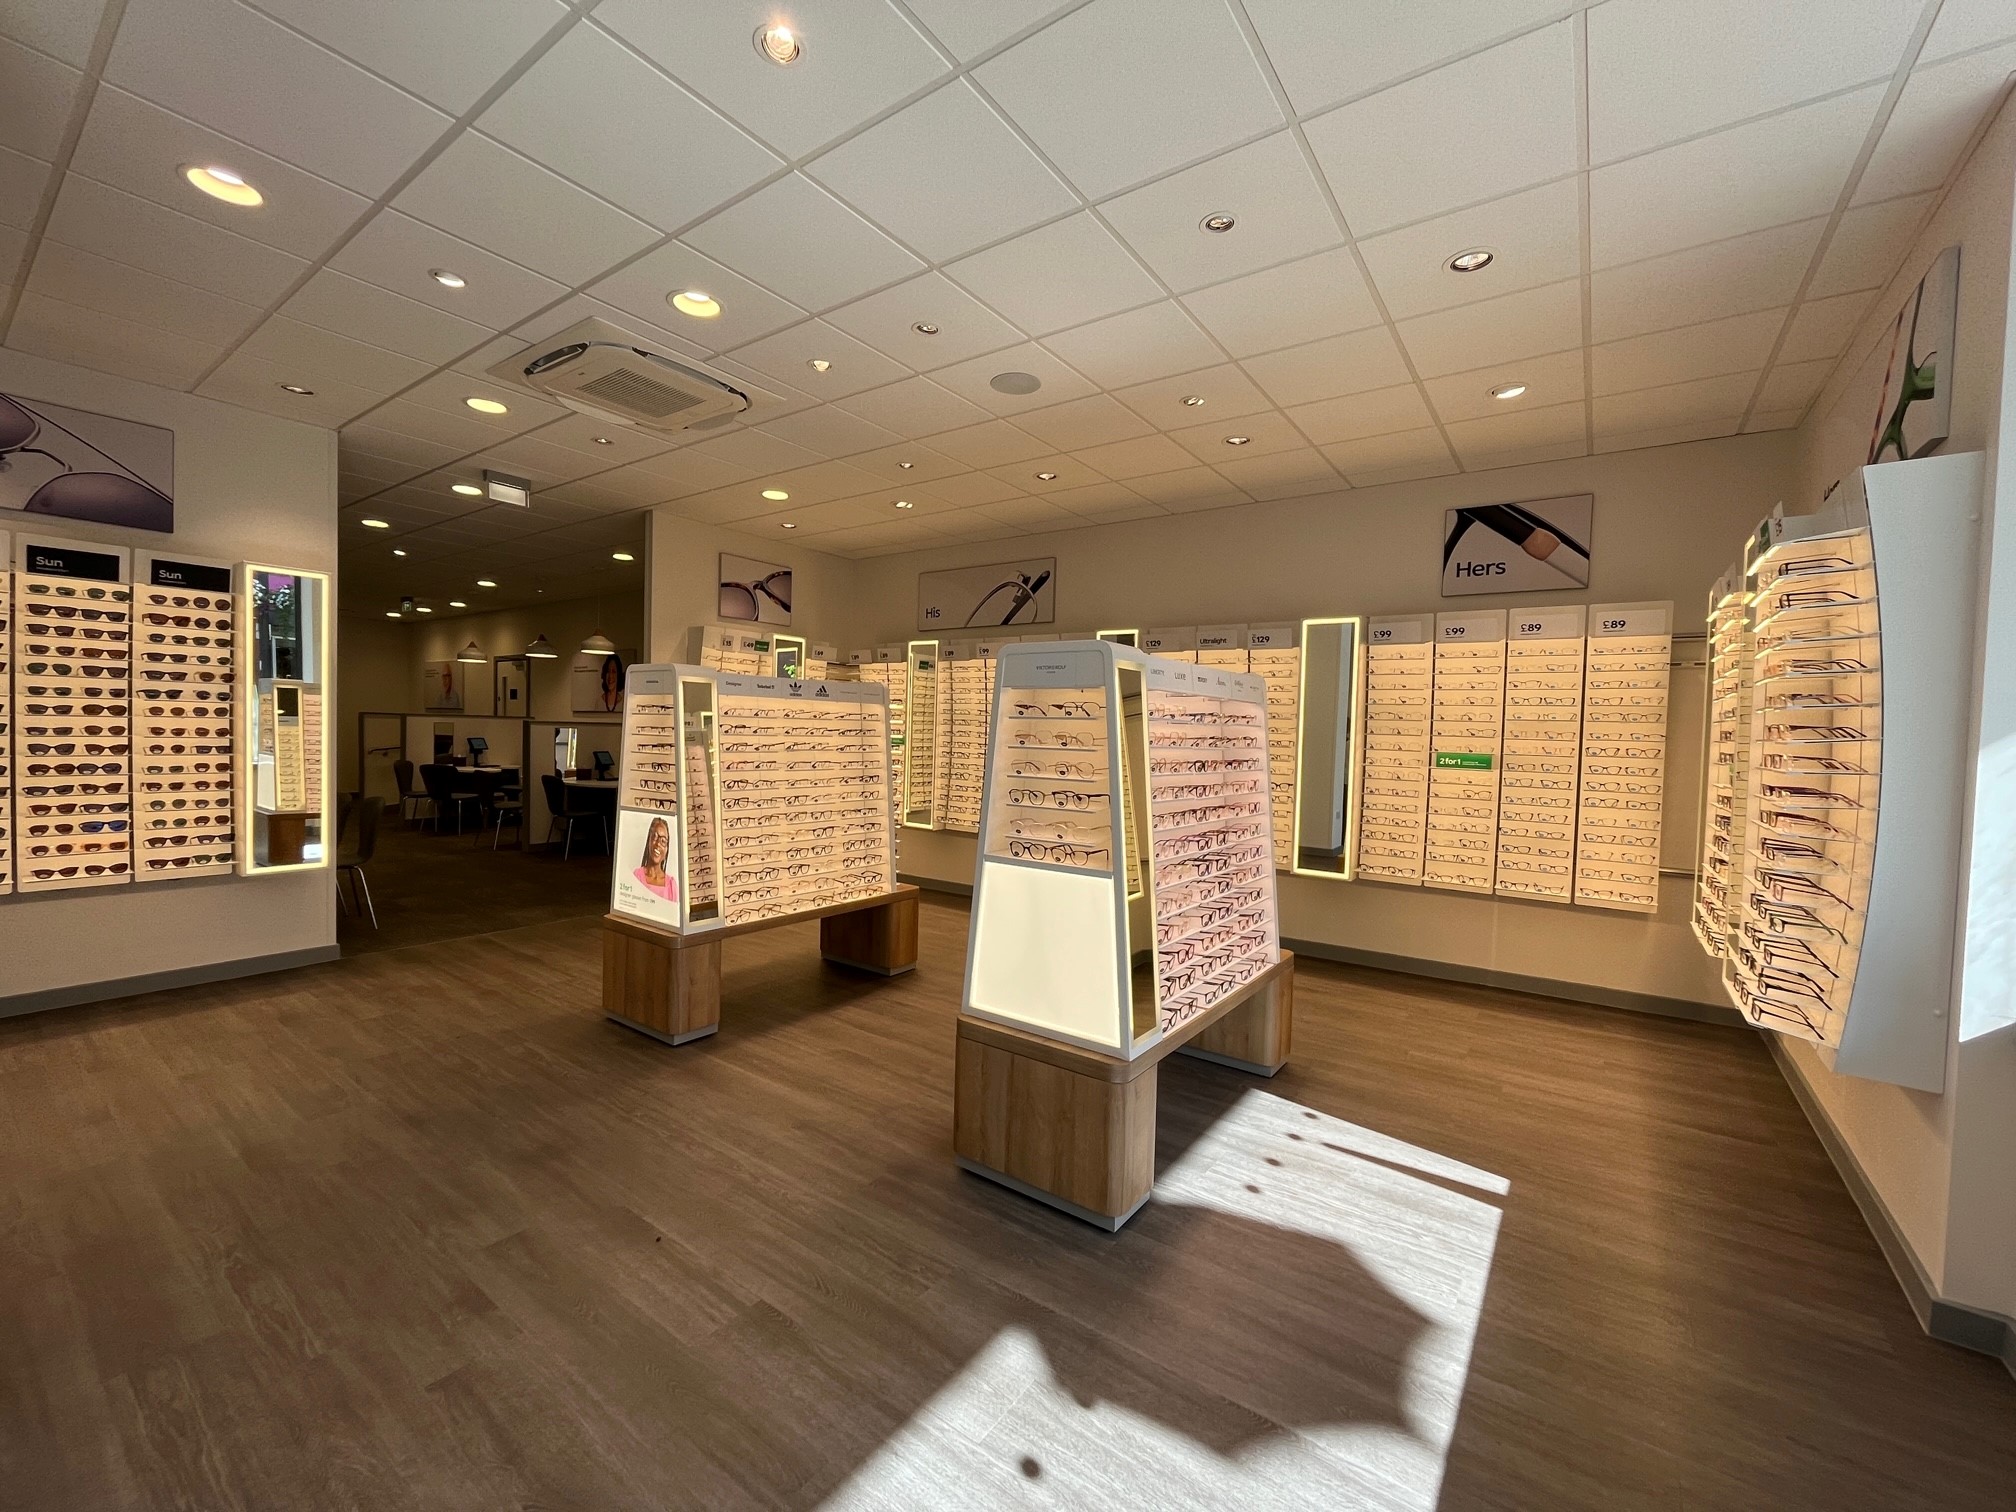 Specsavers Opticians and Audiologists - Alfreton Specsavers Opticians and Audiologists - Alfreton Alfreton 01773 523070